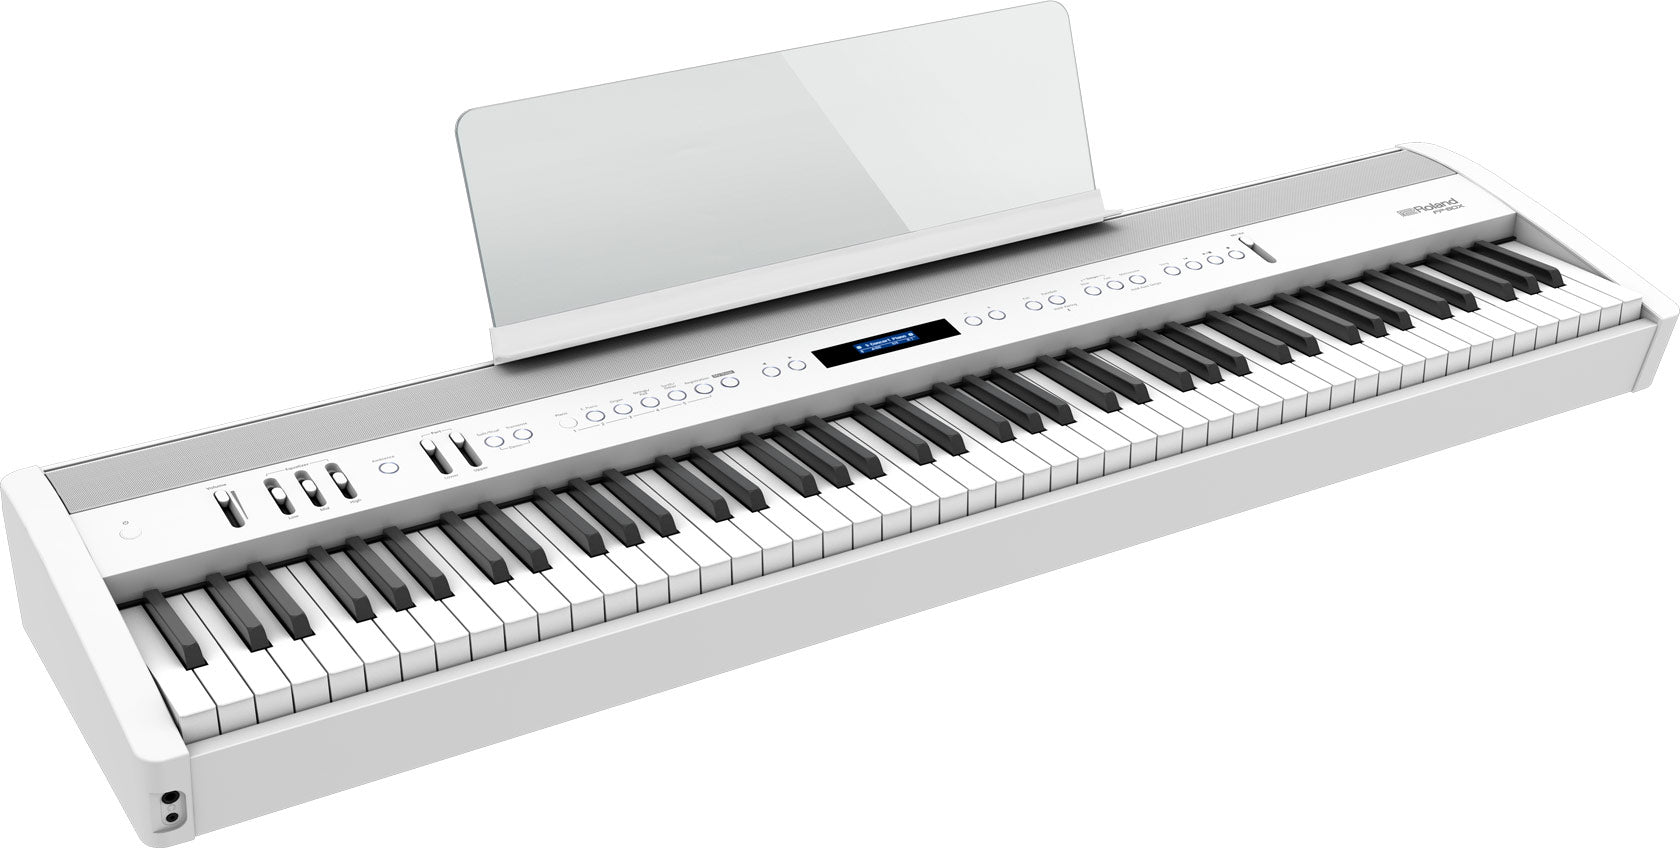 Roland FP-60X 88-key Digital Piano Home Package with Piano Bench, RH-5 Headphone, Pedals and Piano Stand - White (FP60X / FP 60X), ROLAND, DIGITAL PIANO, roland-digital-piano-fp60x-wh, ZOSO MUSIC SDN BHD